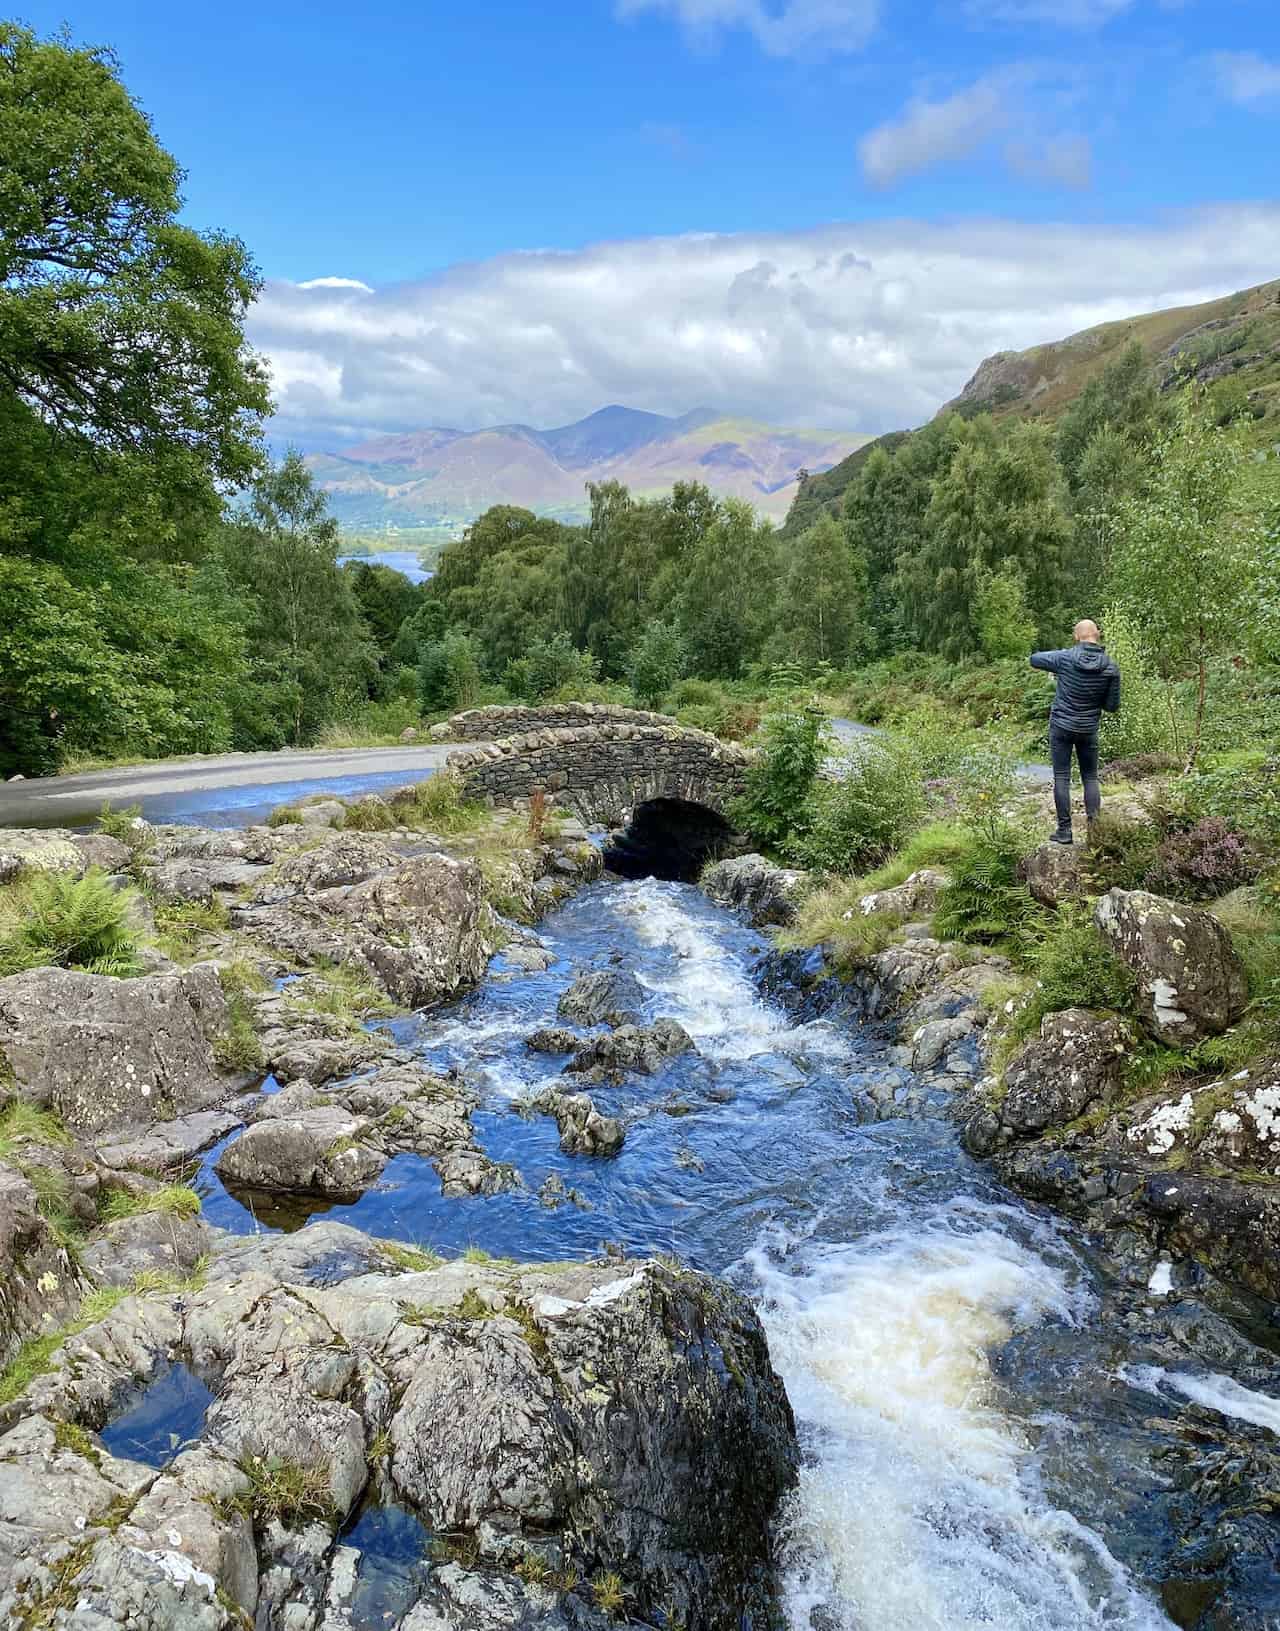 Ashness Bridge is perhaps the most photographed packhorse bridge in the Lake District due to its location and stunning views. This extremely popular viewpoint looks over towards Derwent Water and the Skiddaw mountain range. Similar images are often seen adorning mugs, biscuit tins and tea towels.